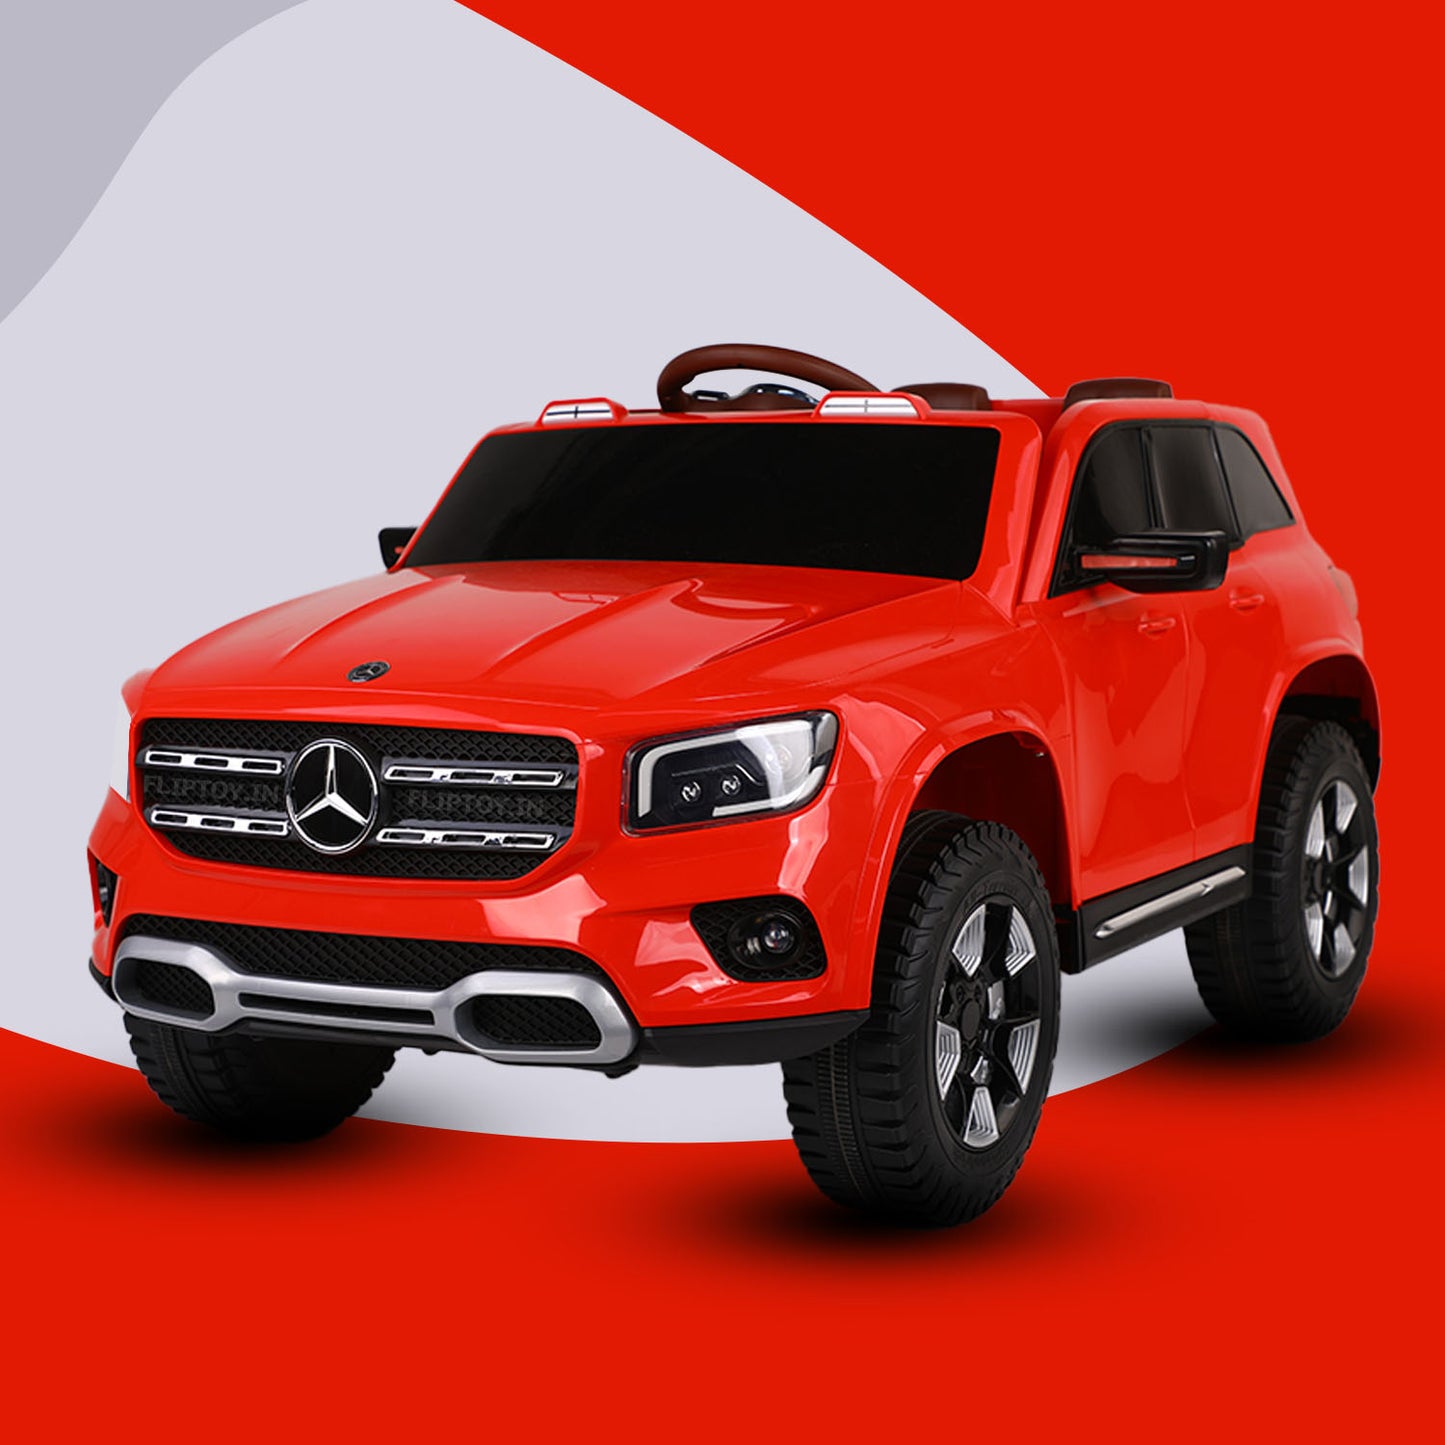 Baybee | Licensed mercedes benz ride on car | Battery Operated Ride on Kids Car | Baby Car with USB, Music | Electric Kids Baby Big Car Toys | Battery Operated Car for Kids to Drive 2 to 6 Years Boys Girls